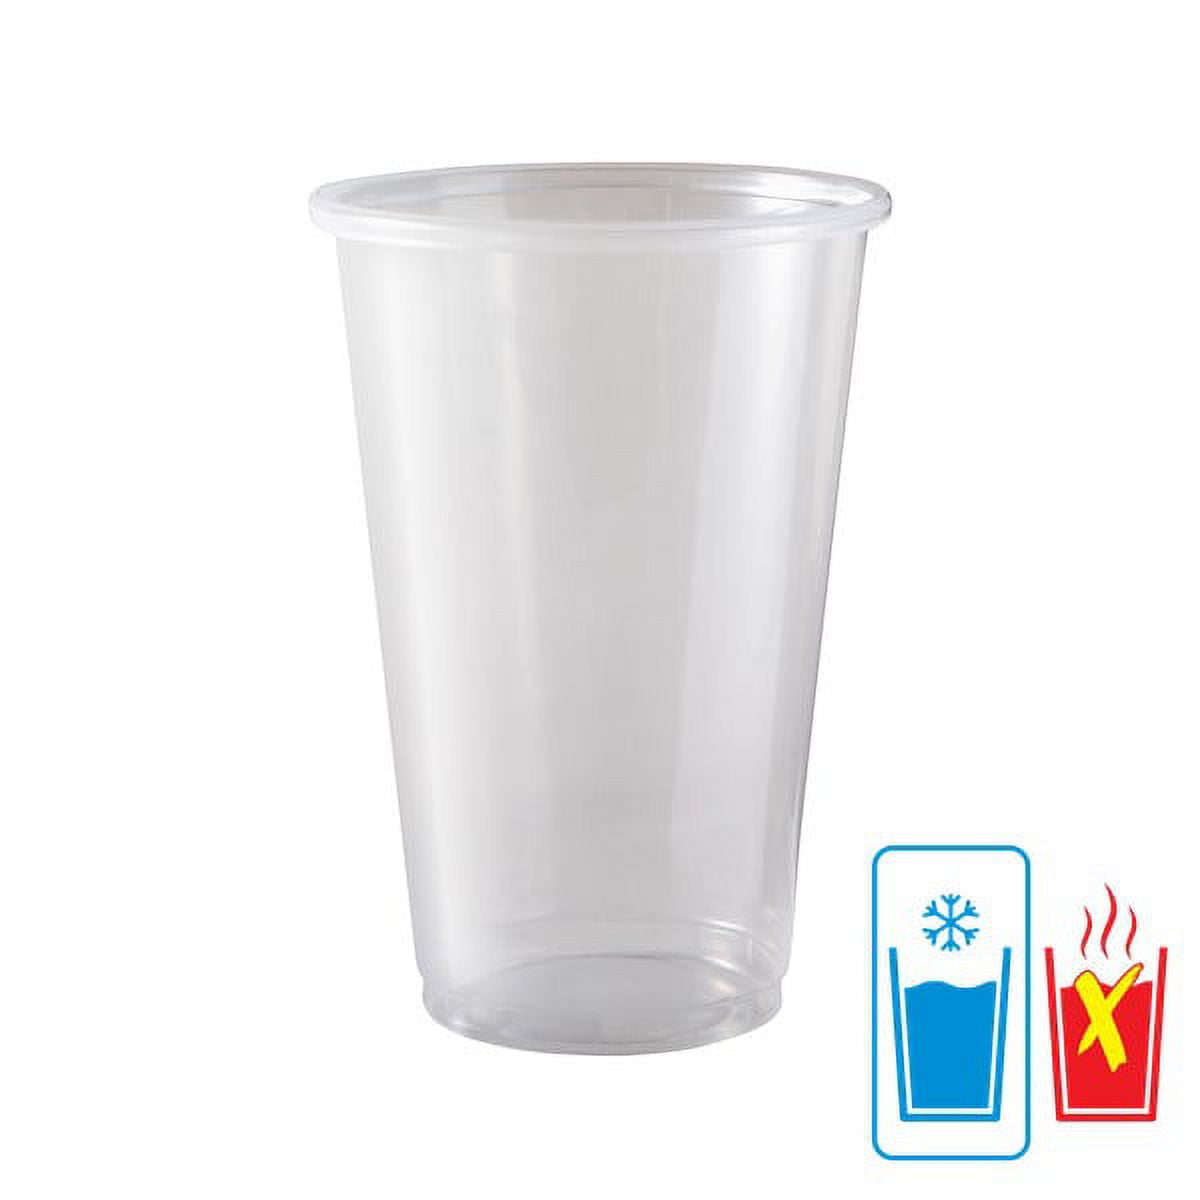 16 oz 50 sets Plastic Cups with Lids BPA Free Clear Plastic Cups Disposable  Coffee Cups Clear Cups f…See more 16 oz 50 sets Plastic Cups with Lids BPA